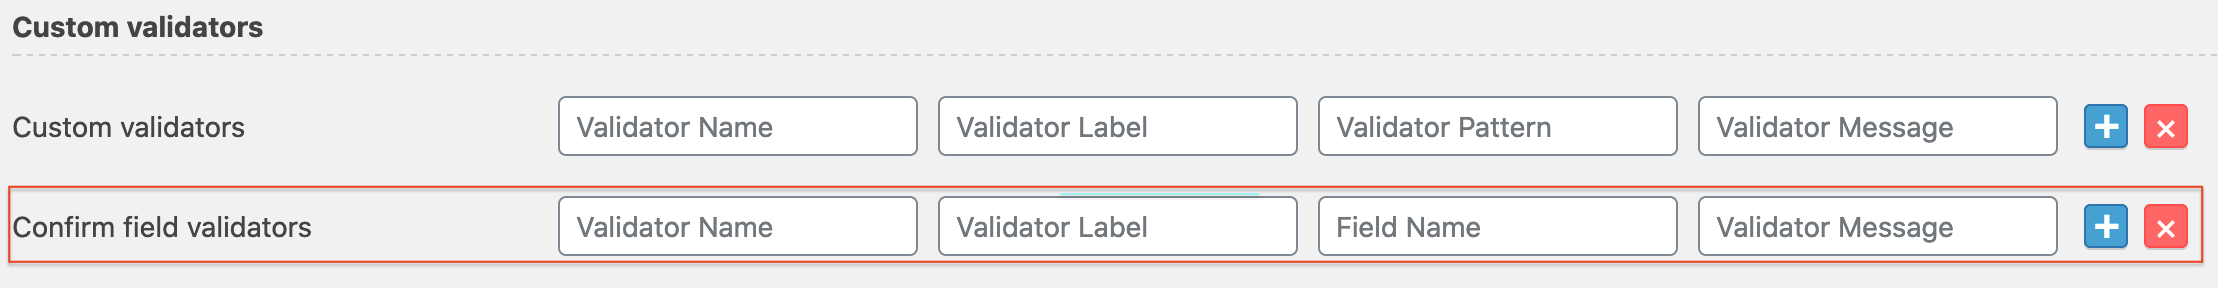 confirm-validator-new-cfe.png